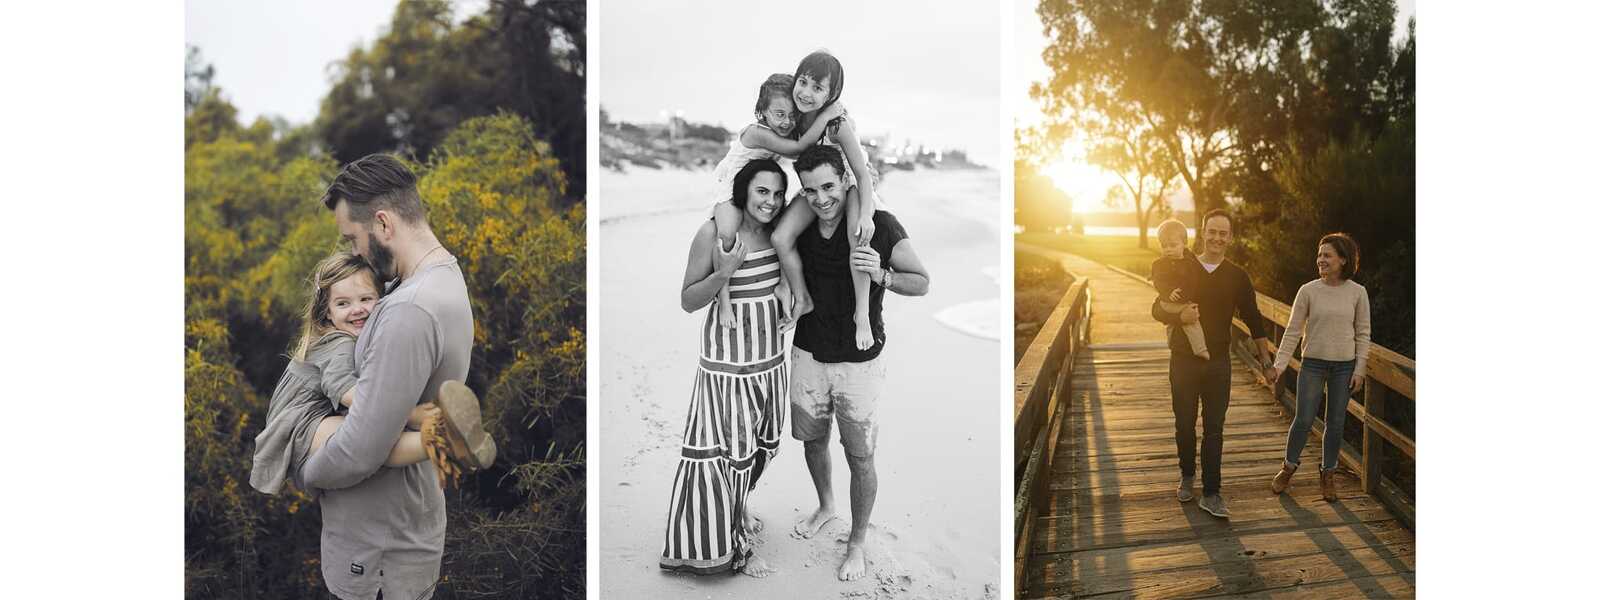 Perth Family Photography triptic image